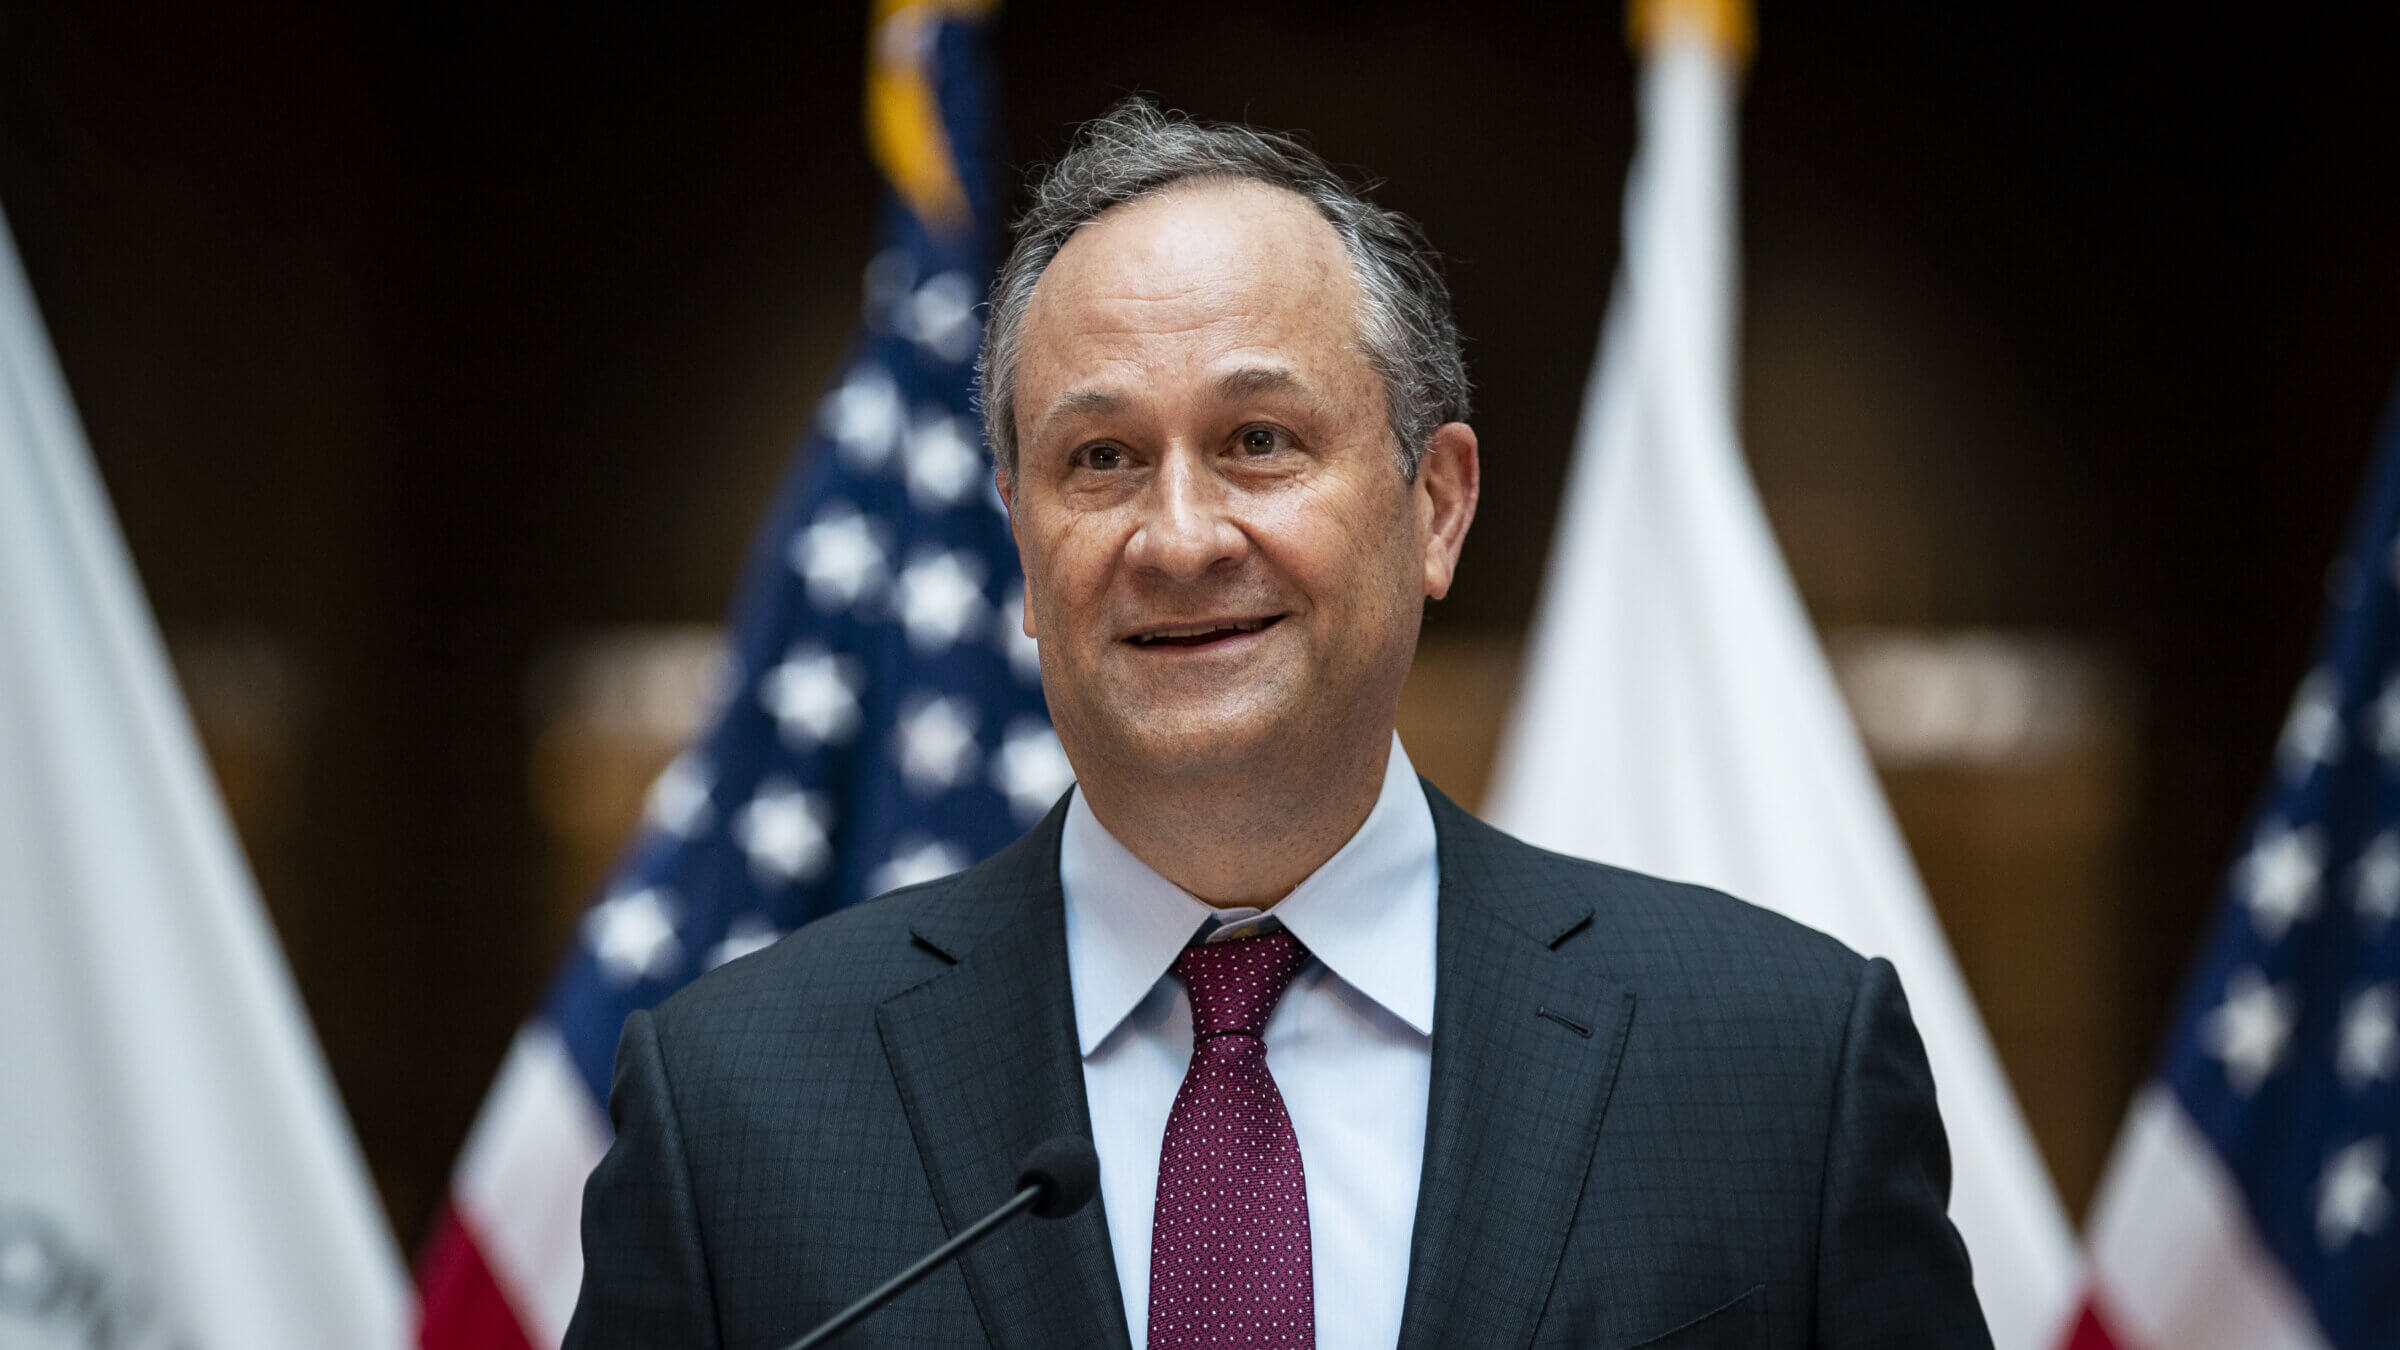 Second Gentleman Doug Emhoff, pictured speaking U.S. Department of Transportation in January, addressed an interfaith iftar dinner in Washington, D.C. Thursday night.